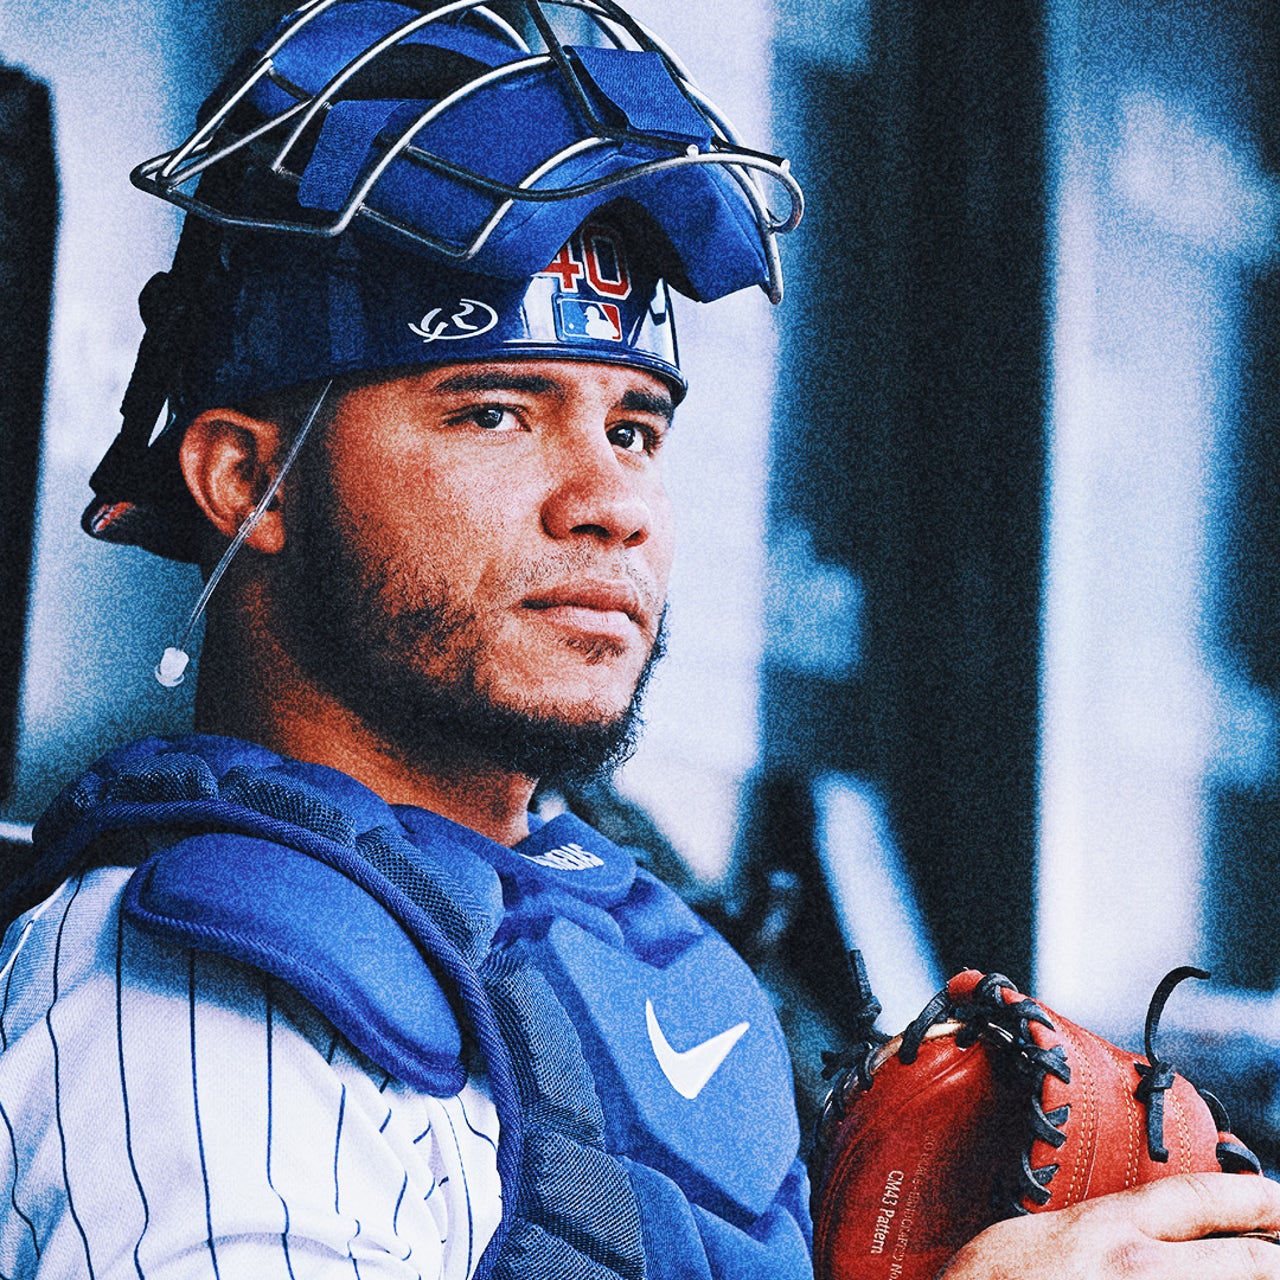 The Cubs still need a catcher. How about one of these Blue Jays